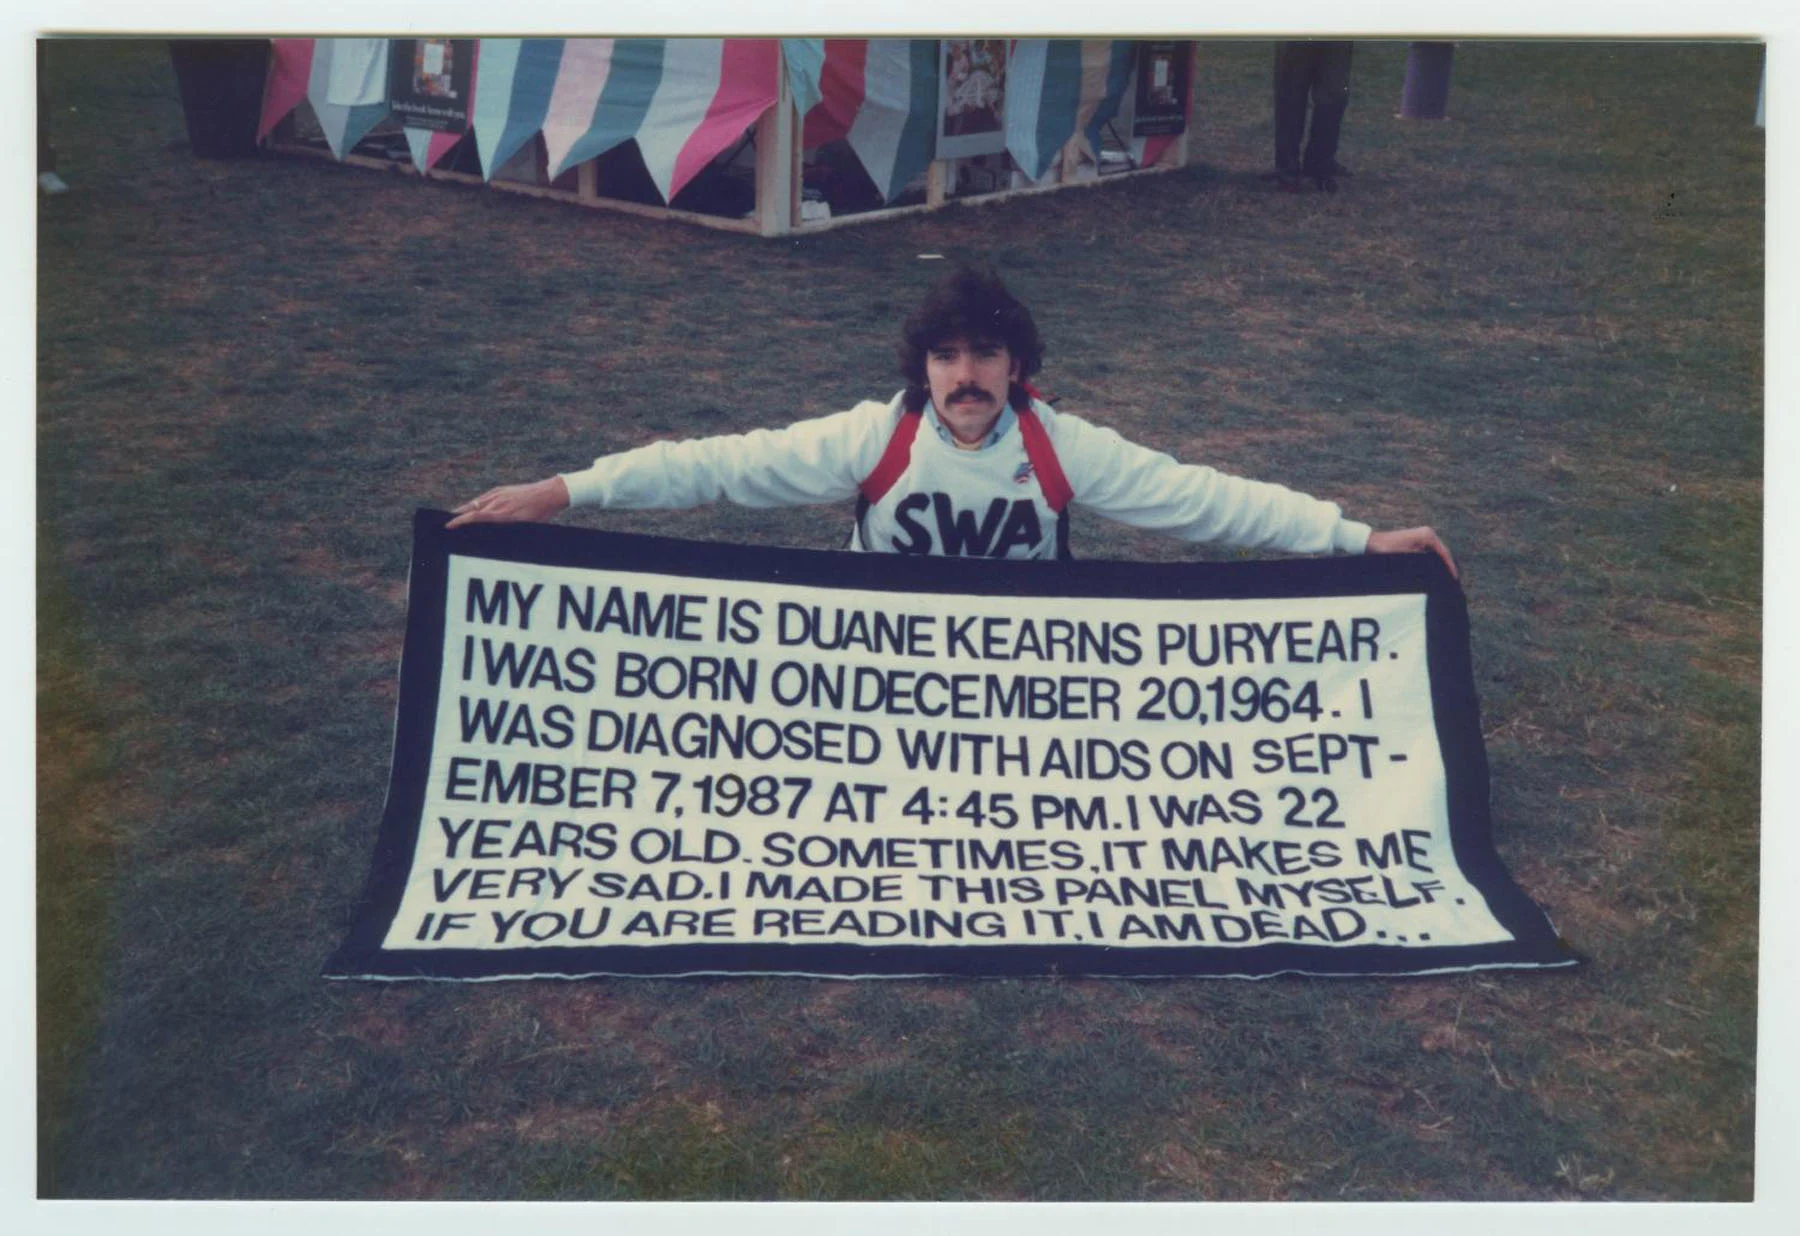 A color photograph of a man wearing a white crew neck with the letters “SWA” across it in black kneels on the grass. He holds a wide black-and-white sign that reads, in black letters on a white background: “MY NAME IS DUANE KEARNS PURYEAR. I WAS BORN ON DECEMBER 20, 1964. I WAS DIAGNOSED WITH AIDS ON SEPTEMBER 7, 1987, AT 4:45PM. I WAS 22 YEARS OLD. SOMETIMES IT MAKES ME VERY SAD. I MADE THIS PANEL MYSELF. IF YOU ARE READING IT, I AM DEAD…”